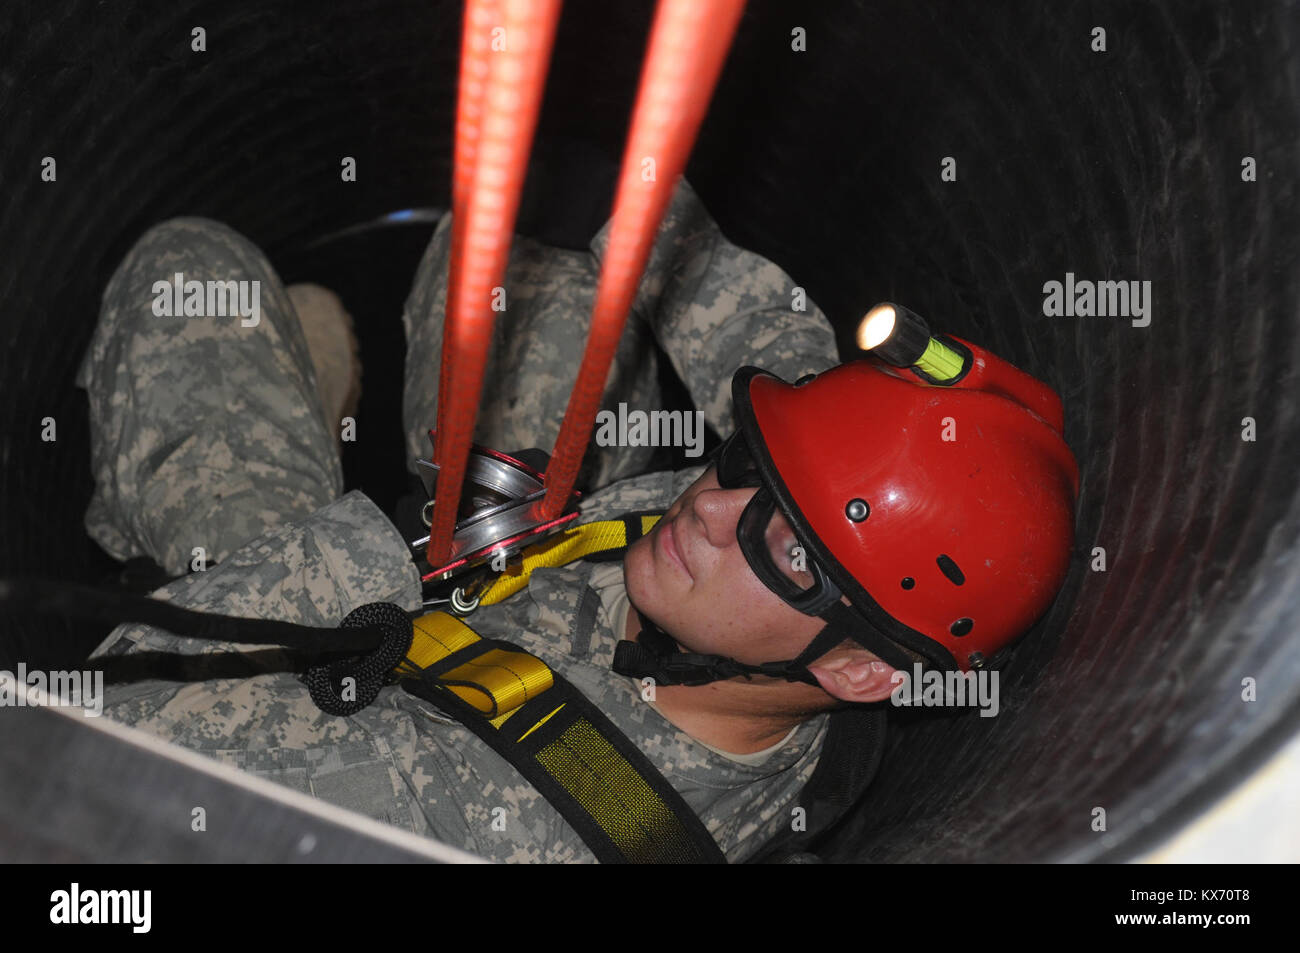 DENVER-- Spc. James L. Moseley, a combat engineer for the 118th Sapper Co, prepares to descend 60 feet into a manhole during a confined-space rescue training mission that took July 24. Soldiers from the 118th are harnessed to a tripod that allows their team mates to carefully lower them to the bottom of the obstacle in order to rescue a casualty and safely return them to the surface for medical attention. The training took place during the annual Vigilant Guard exercise held throughout Colorado Stock Photo